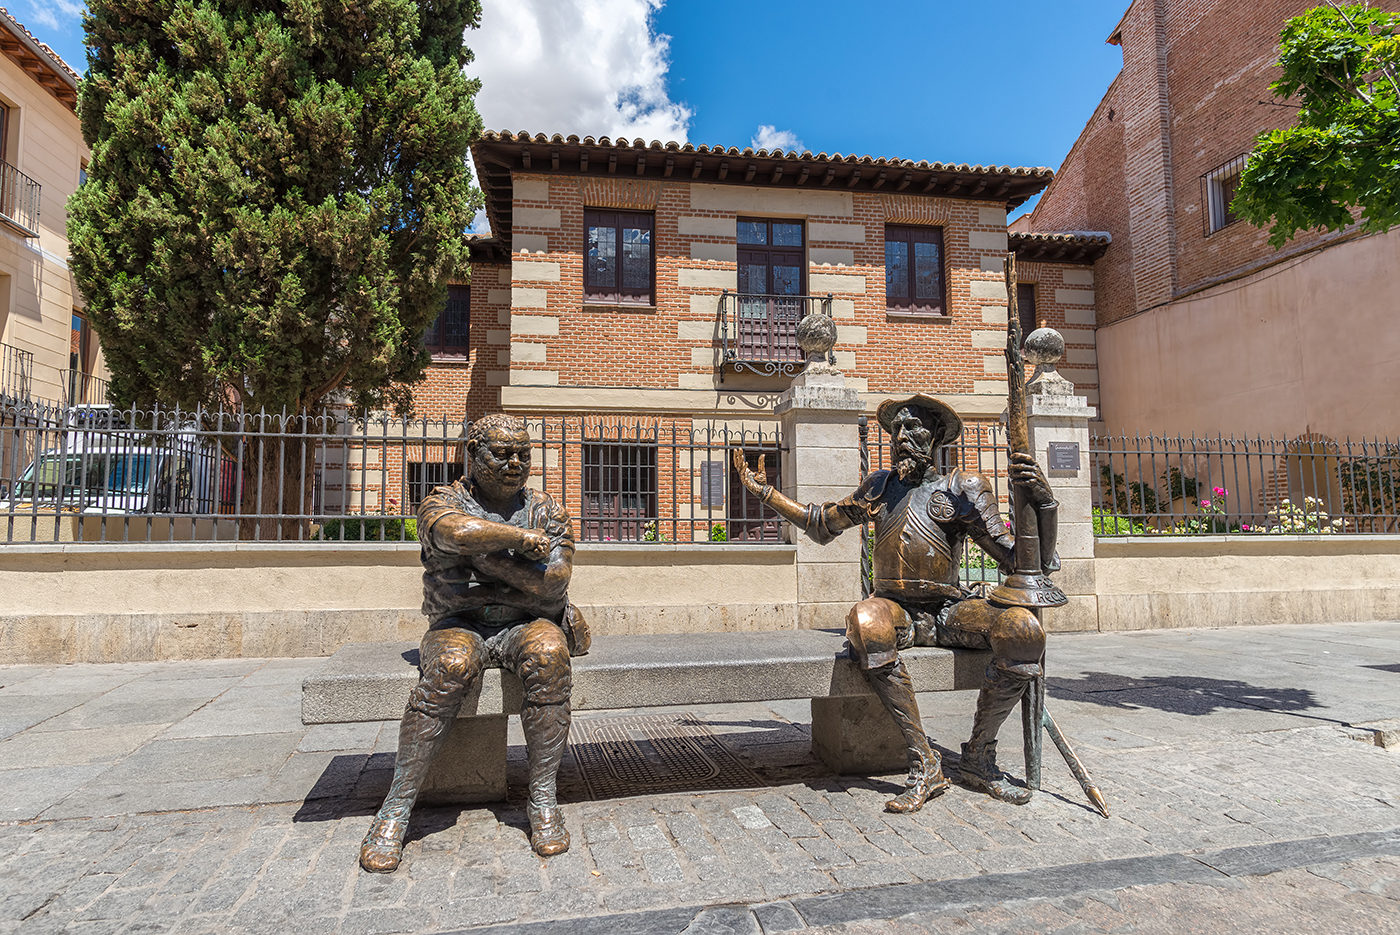 A glimpse of the land and history of Cervantes